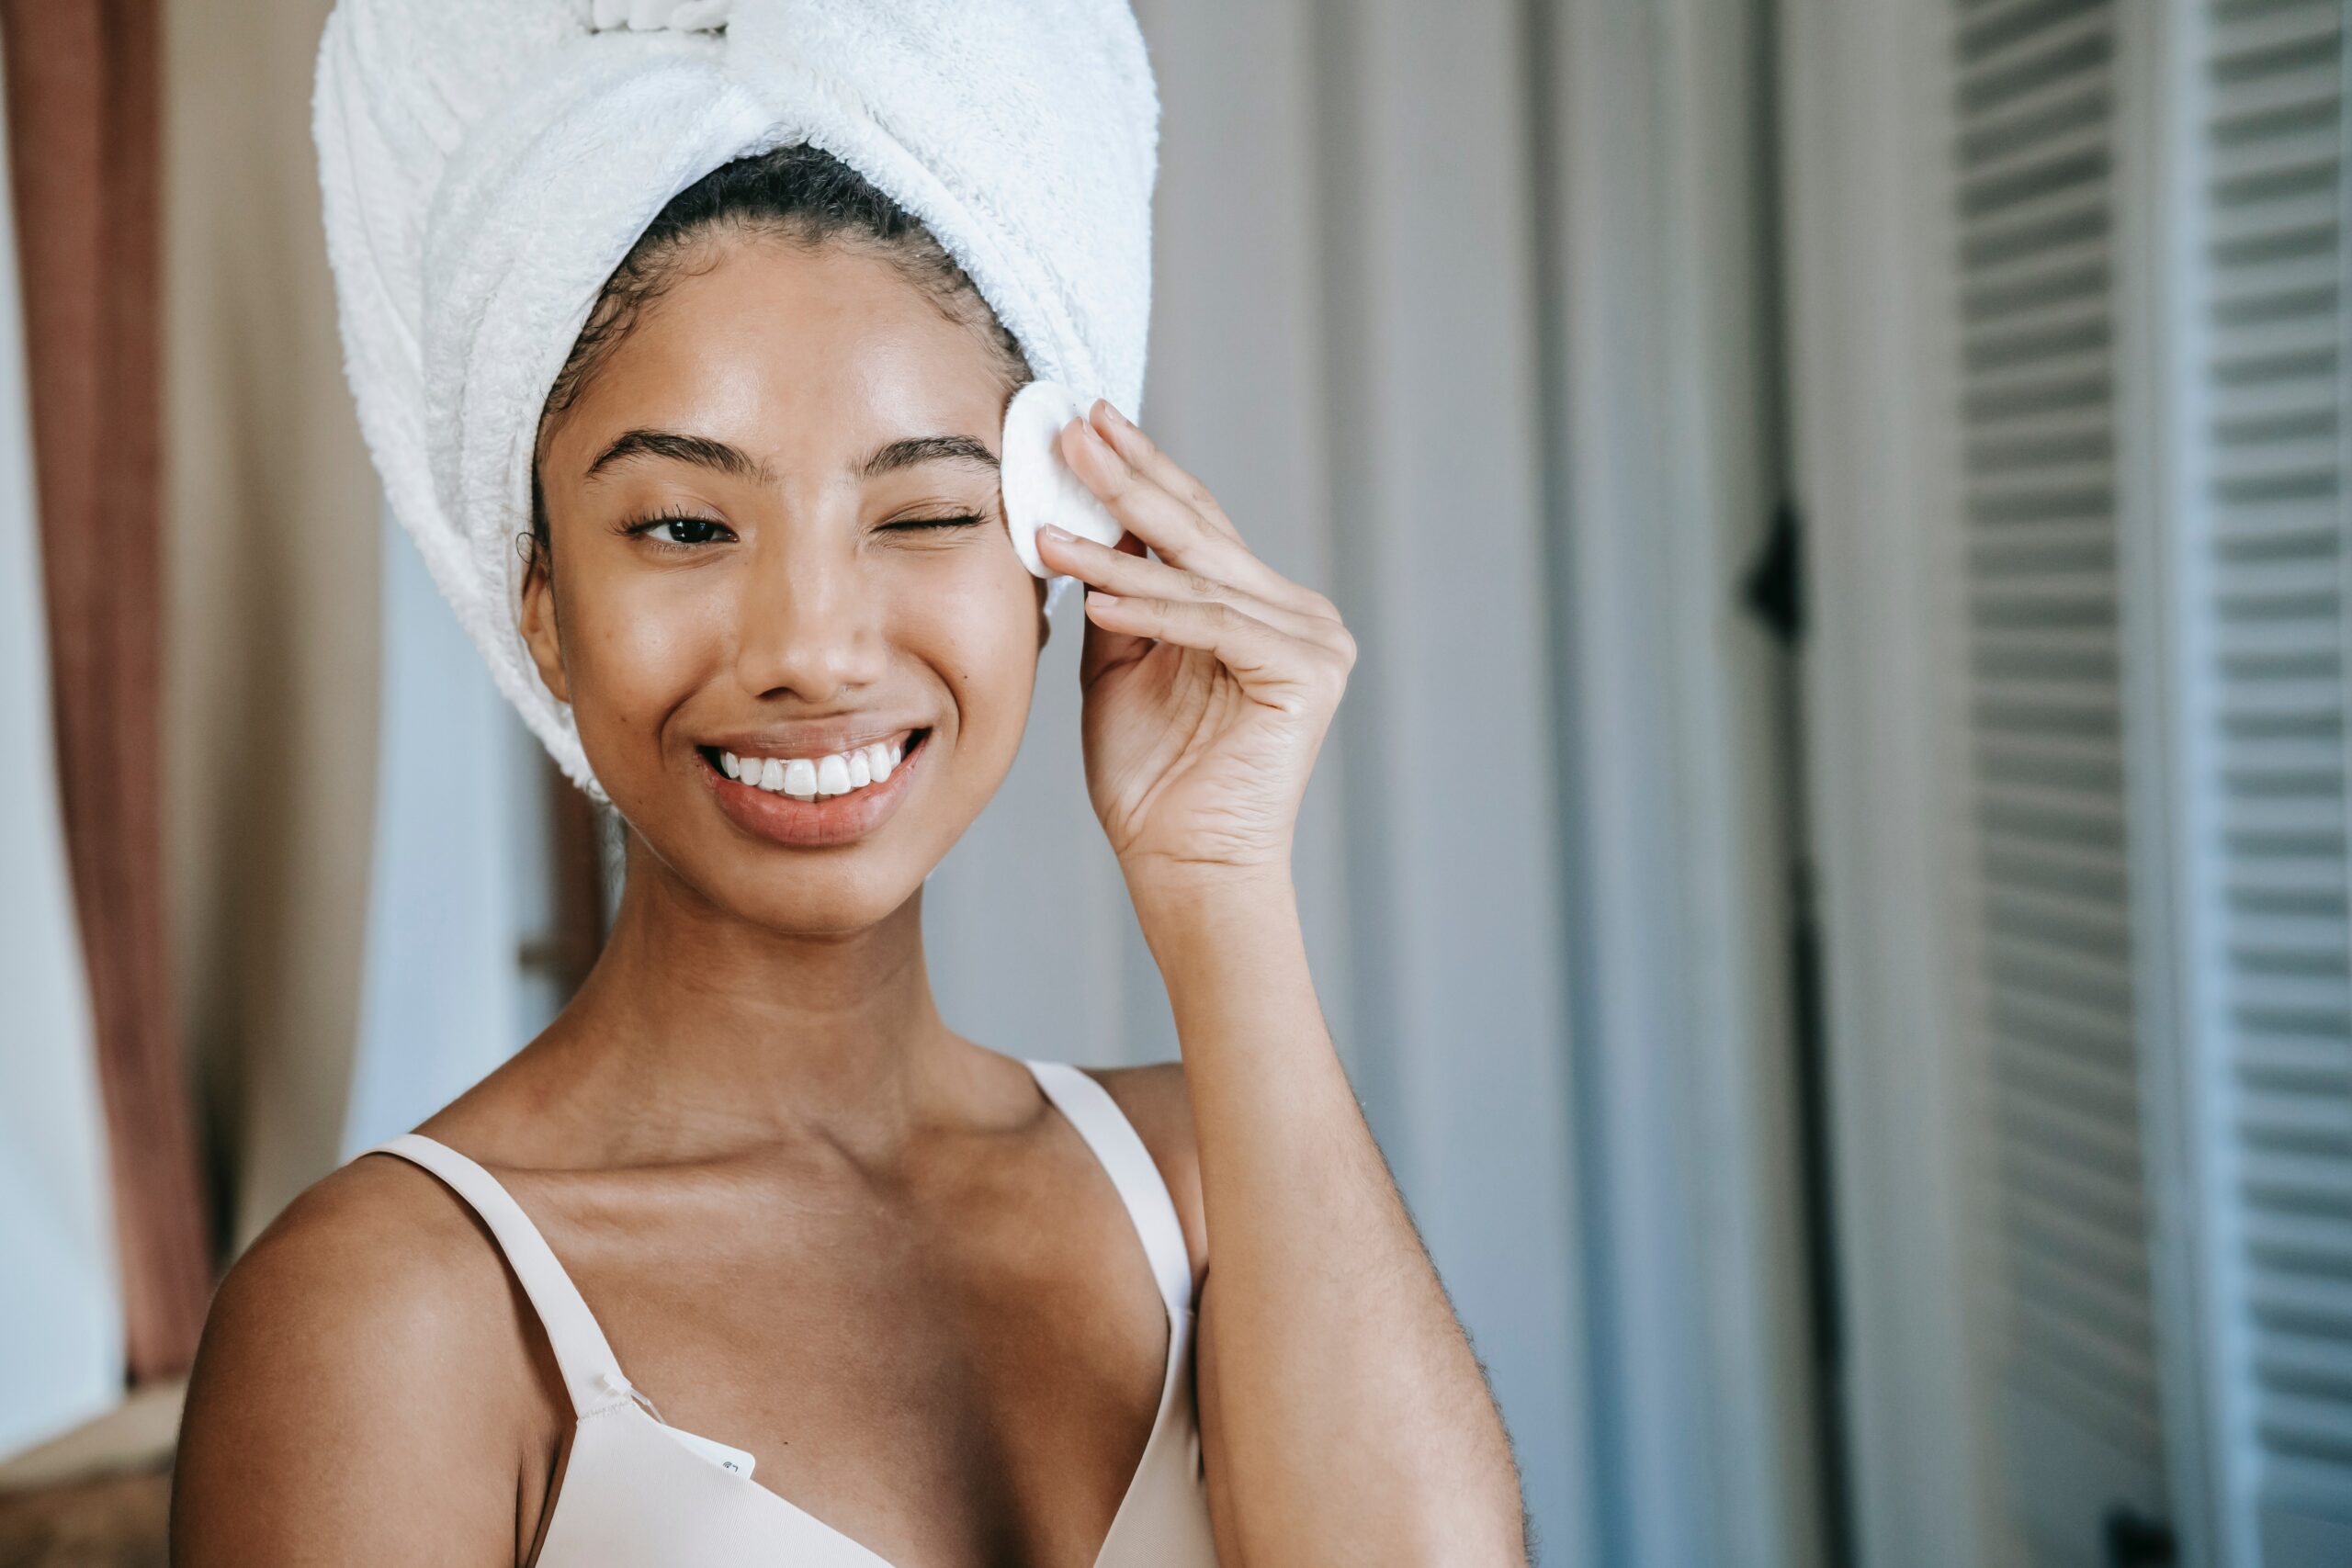 best toners for dry skin